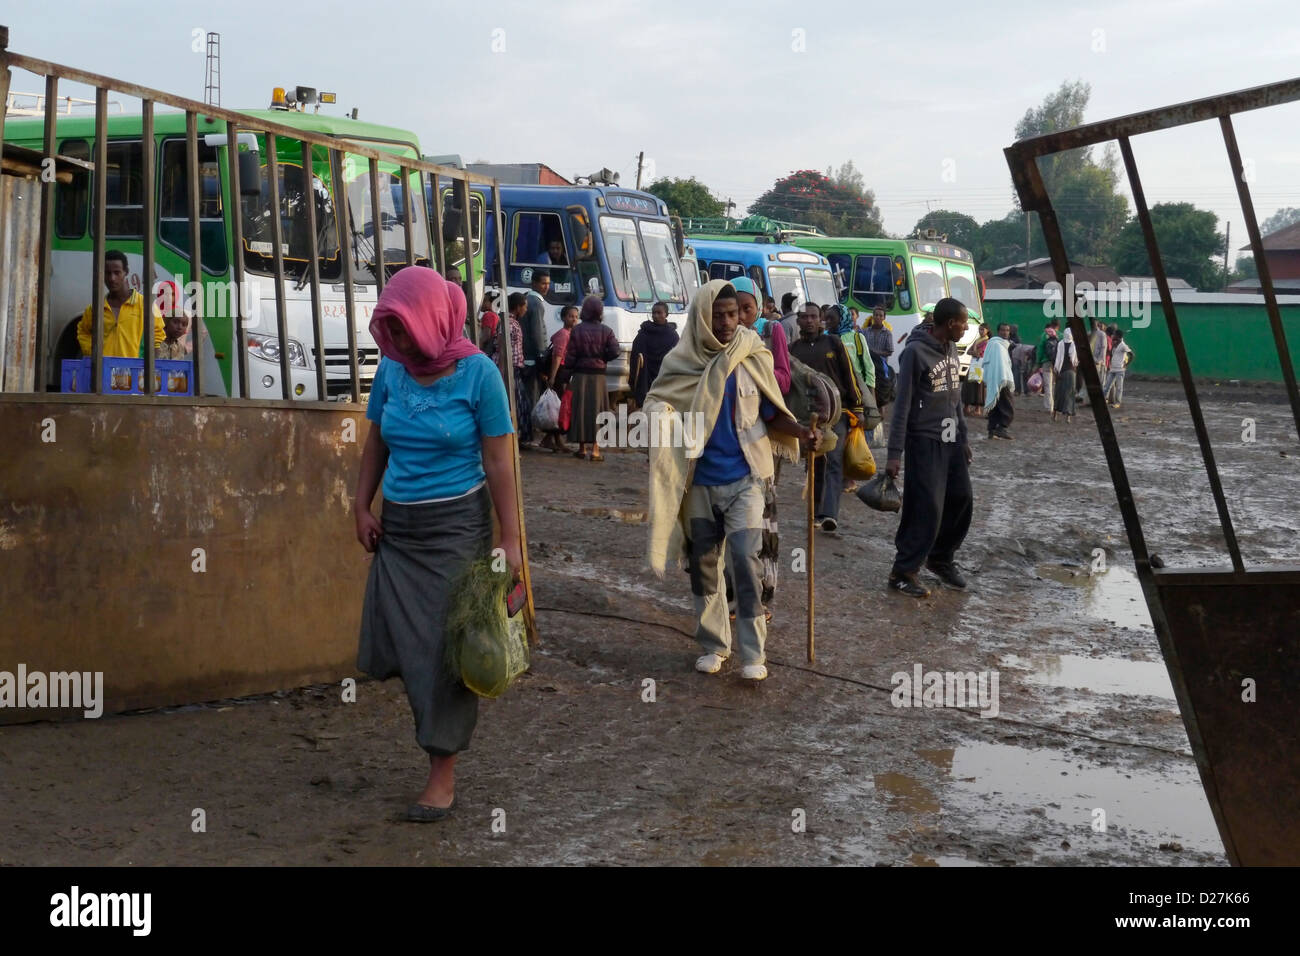 ETHIOPIA Street scenes on a rainy day in Chagni. Bus station. Stock Photo